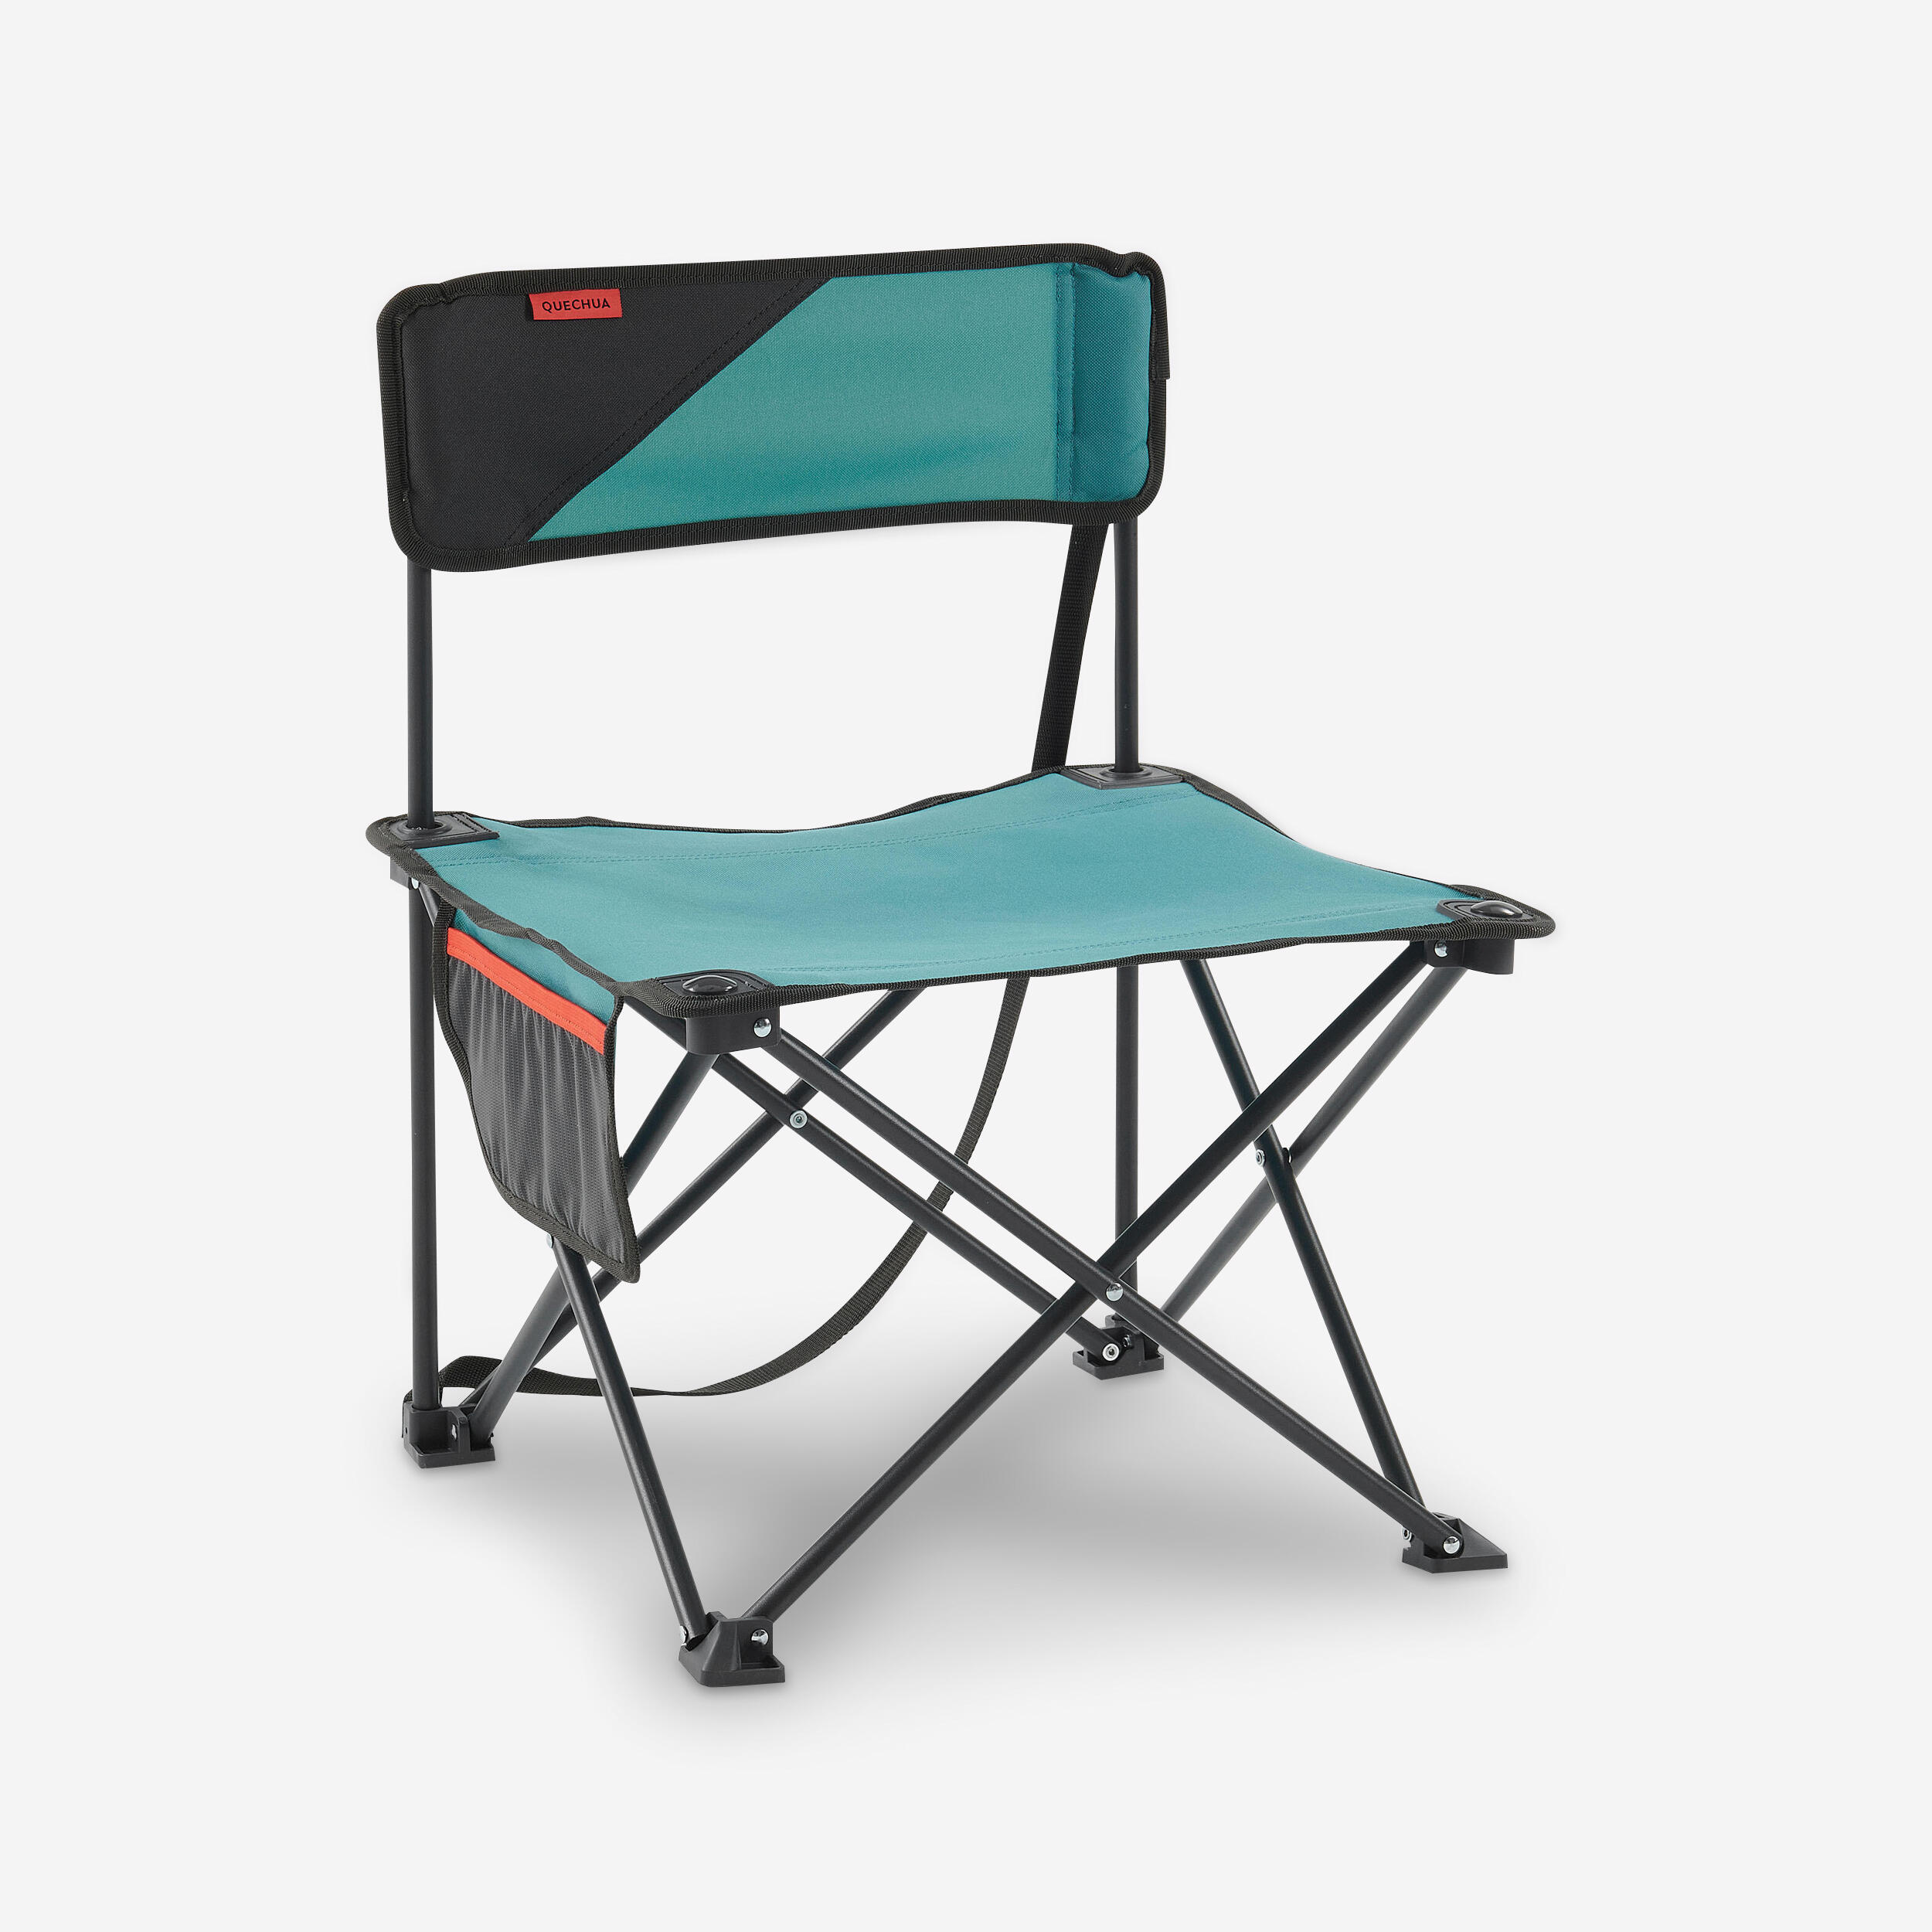 LOW FOLDING CAMPING CHAIR MH100 Blue 1/11